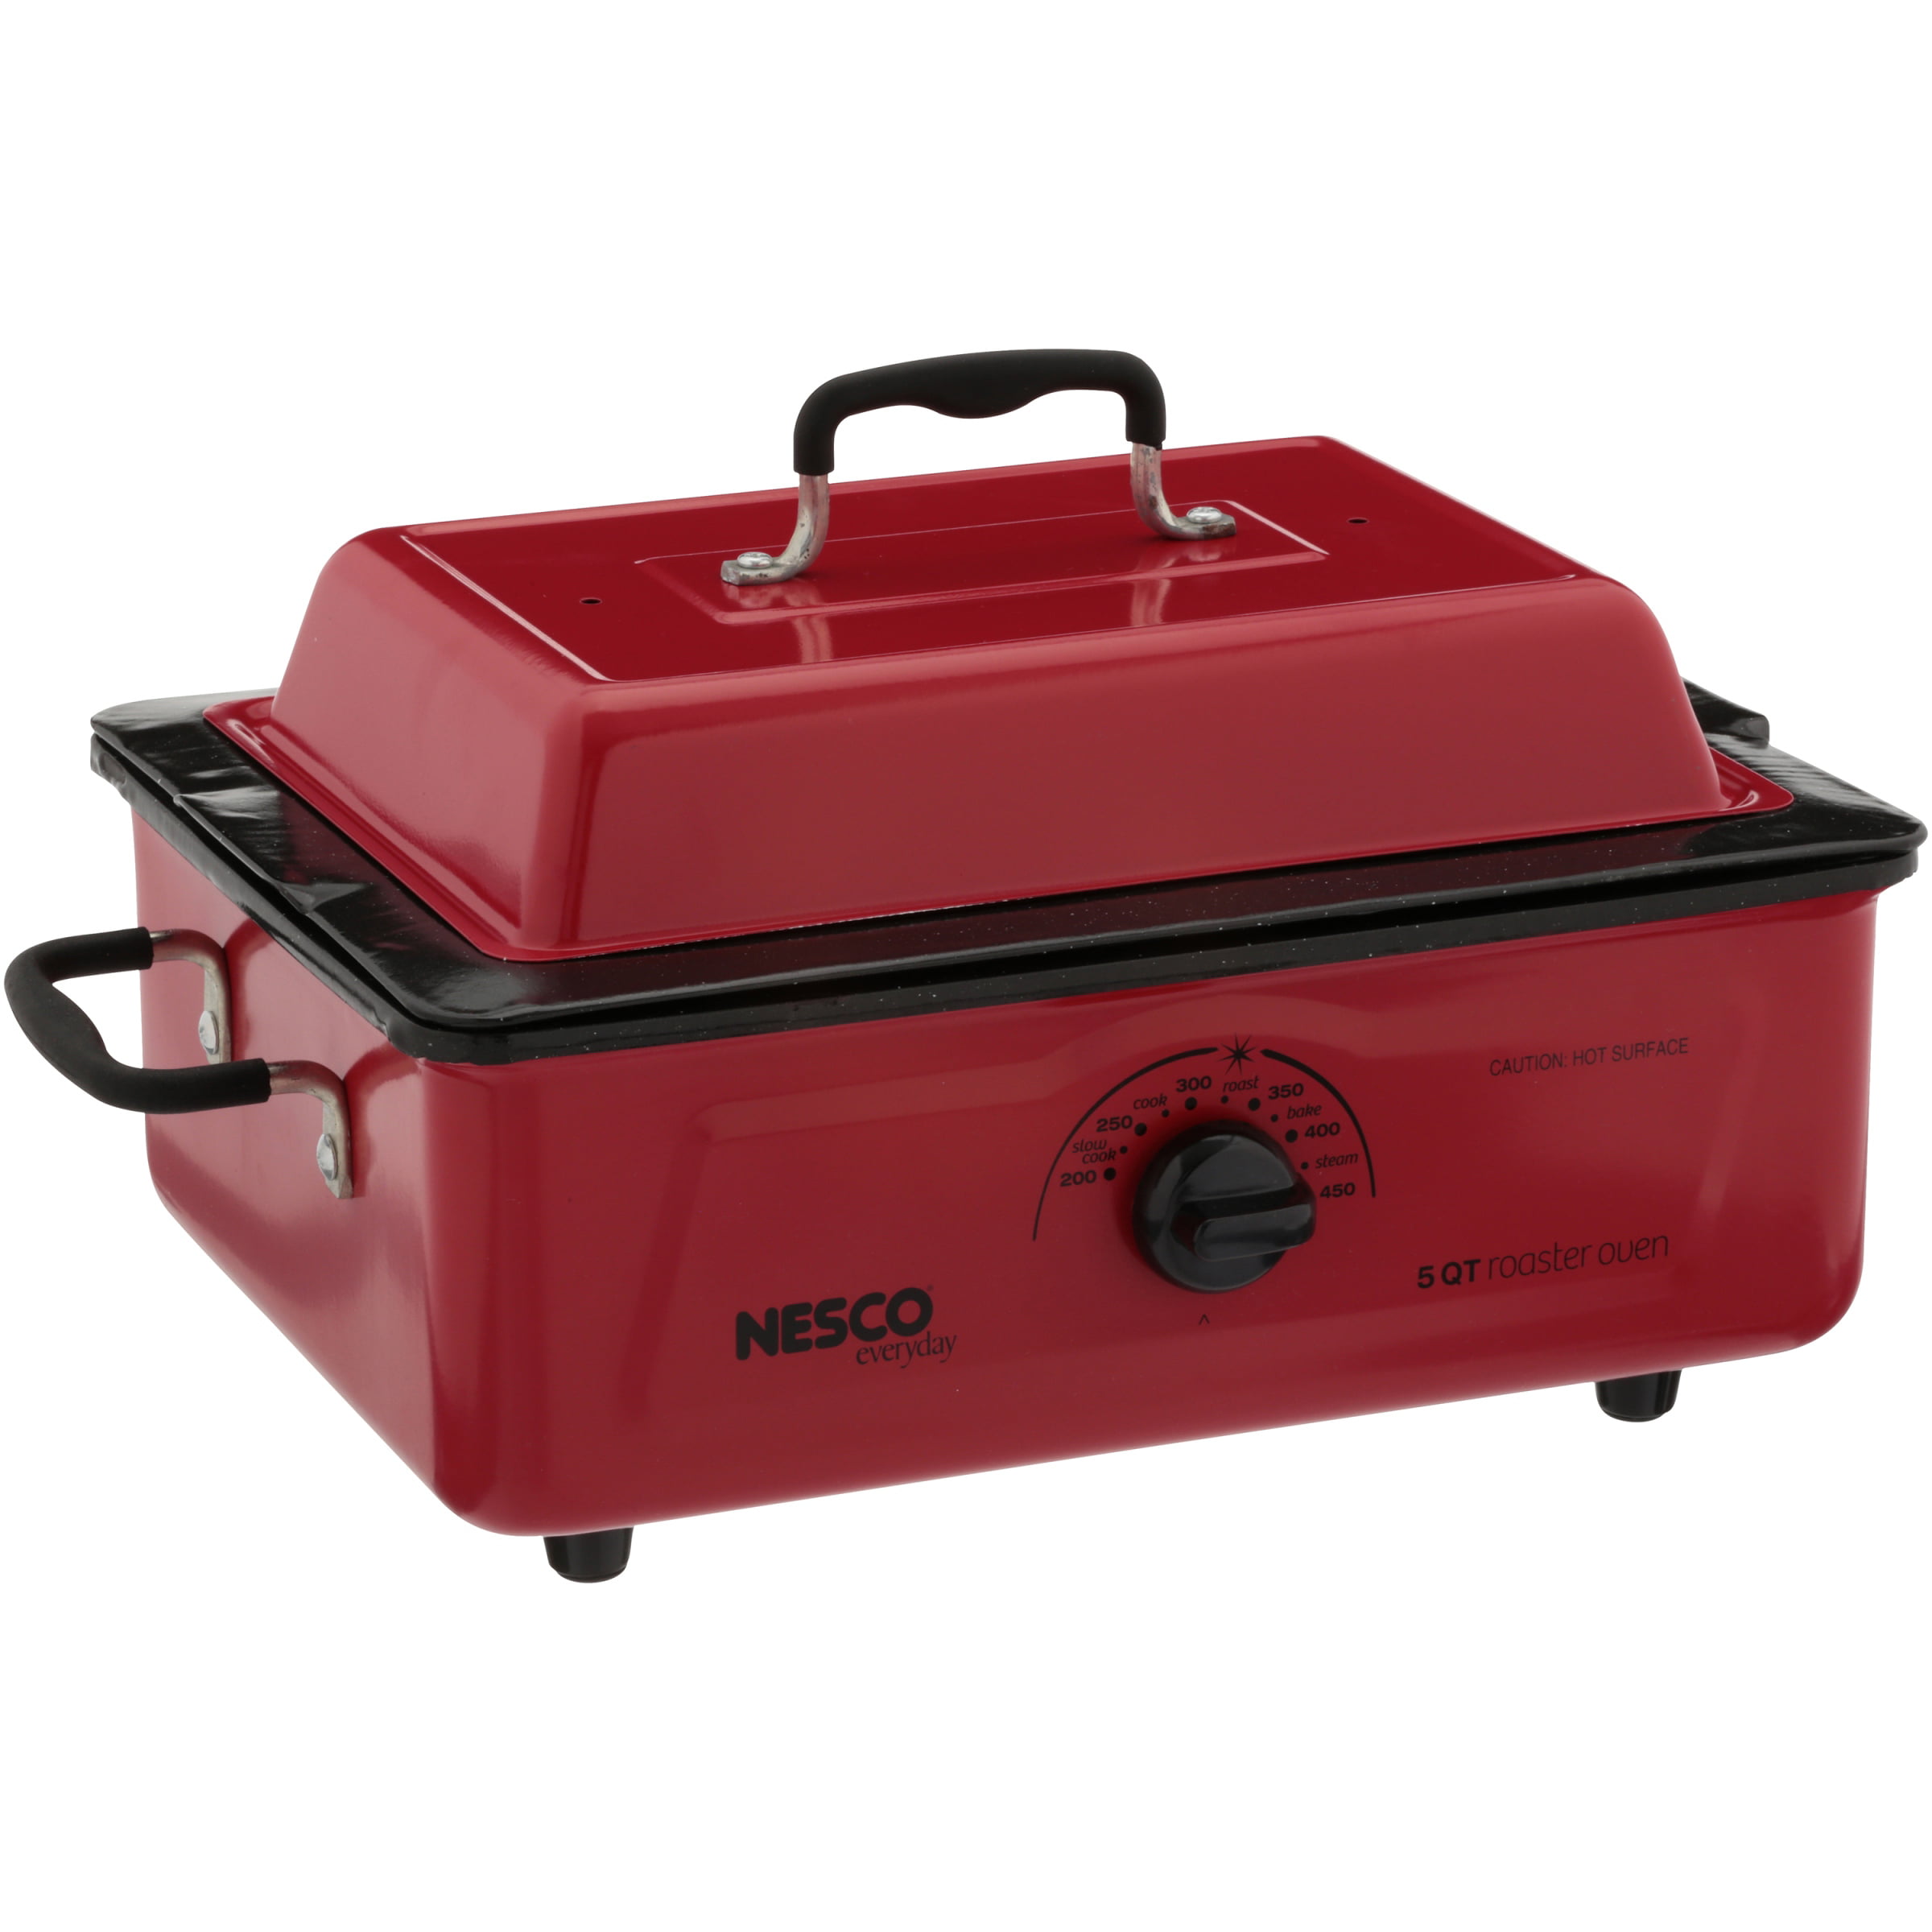 600 watts Red Roaster Oven with Porcelain Cookwell 5 quart NESCO 4815-12 